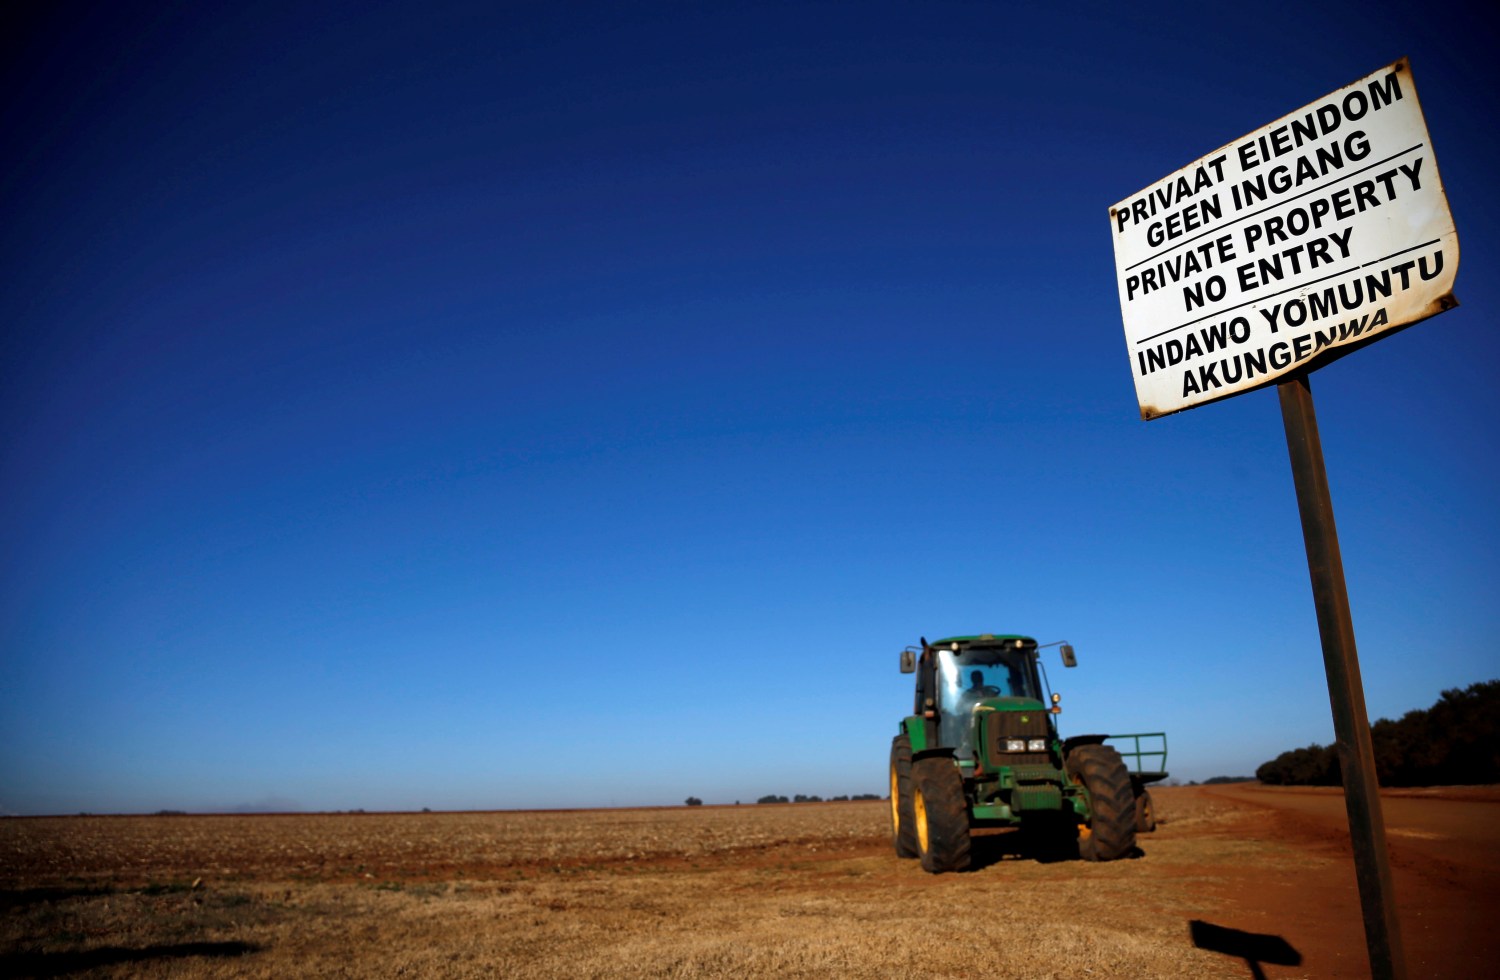 FILE PHOTO: A 'No entry sign' is seen at an entrance of a farm outside Witbank, Mpumalanga province, South Africa July 13, 2018. REUTERS/Siphiwe Sibeko/File Photo - RC1F780A9920